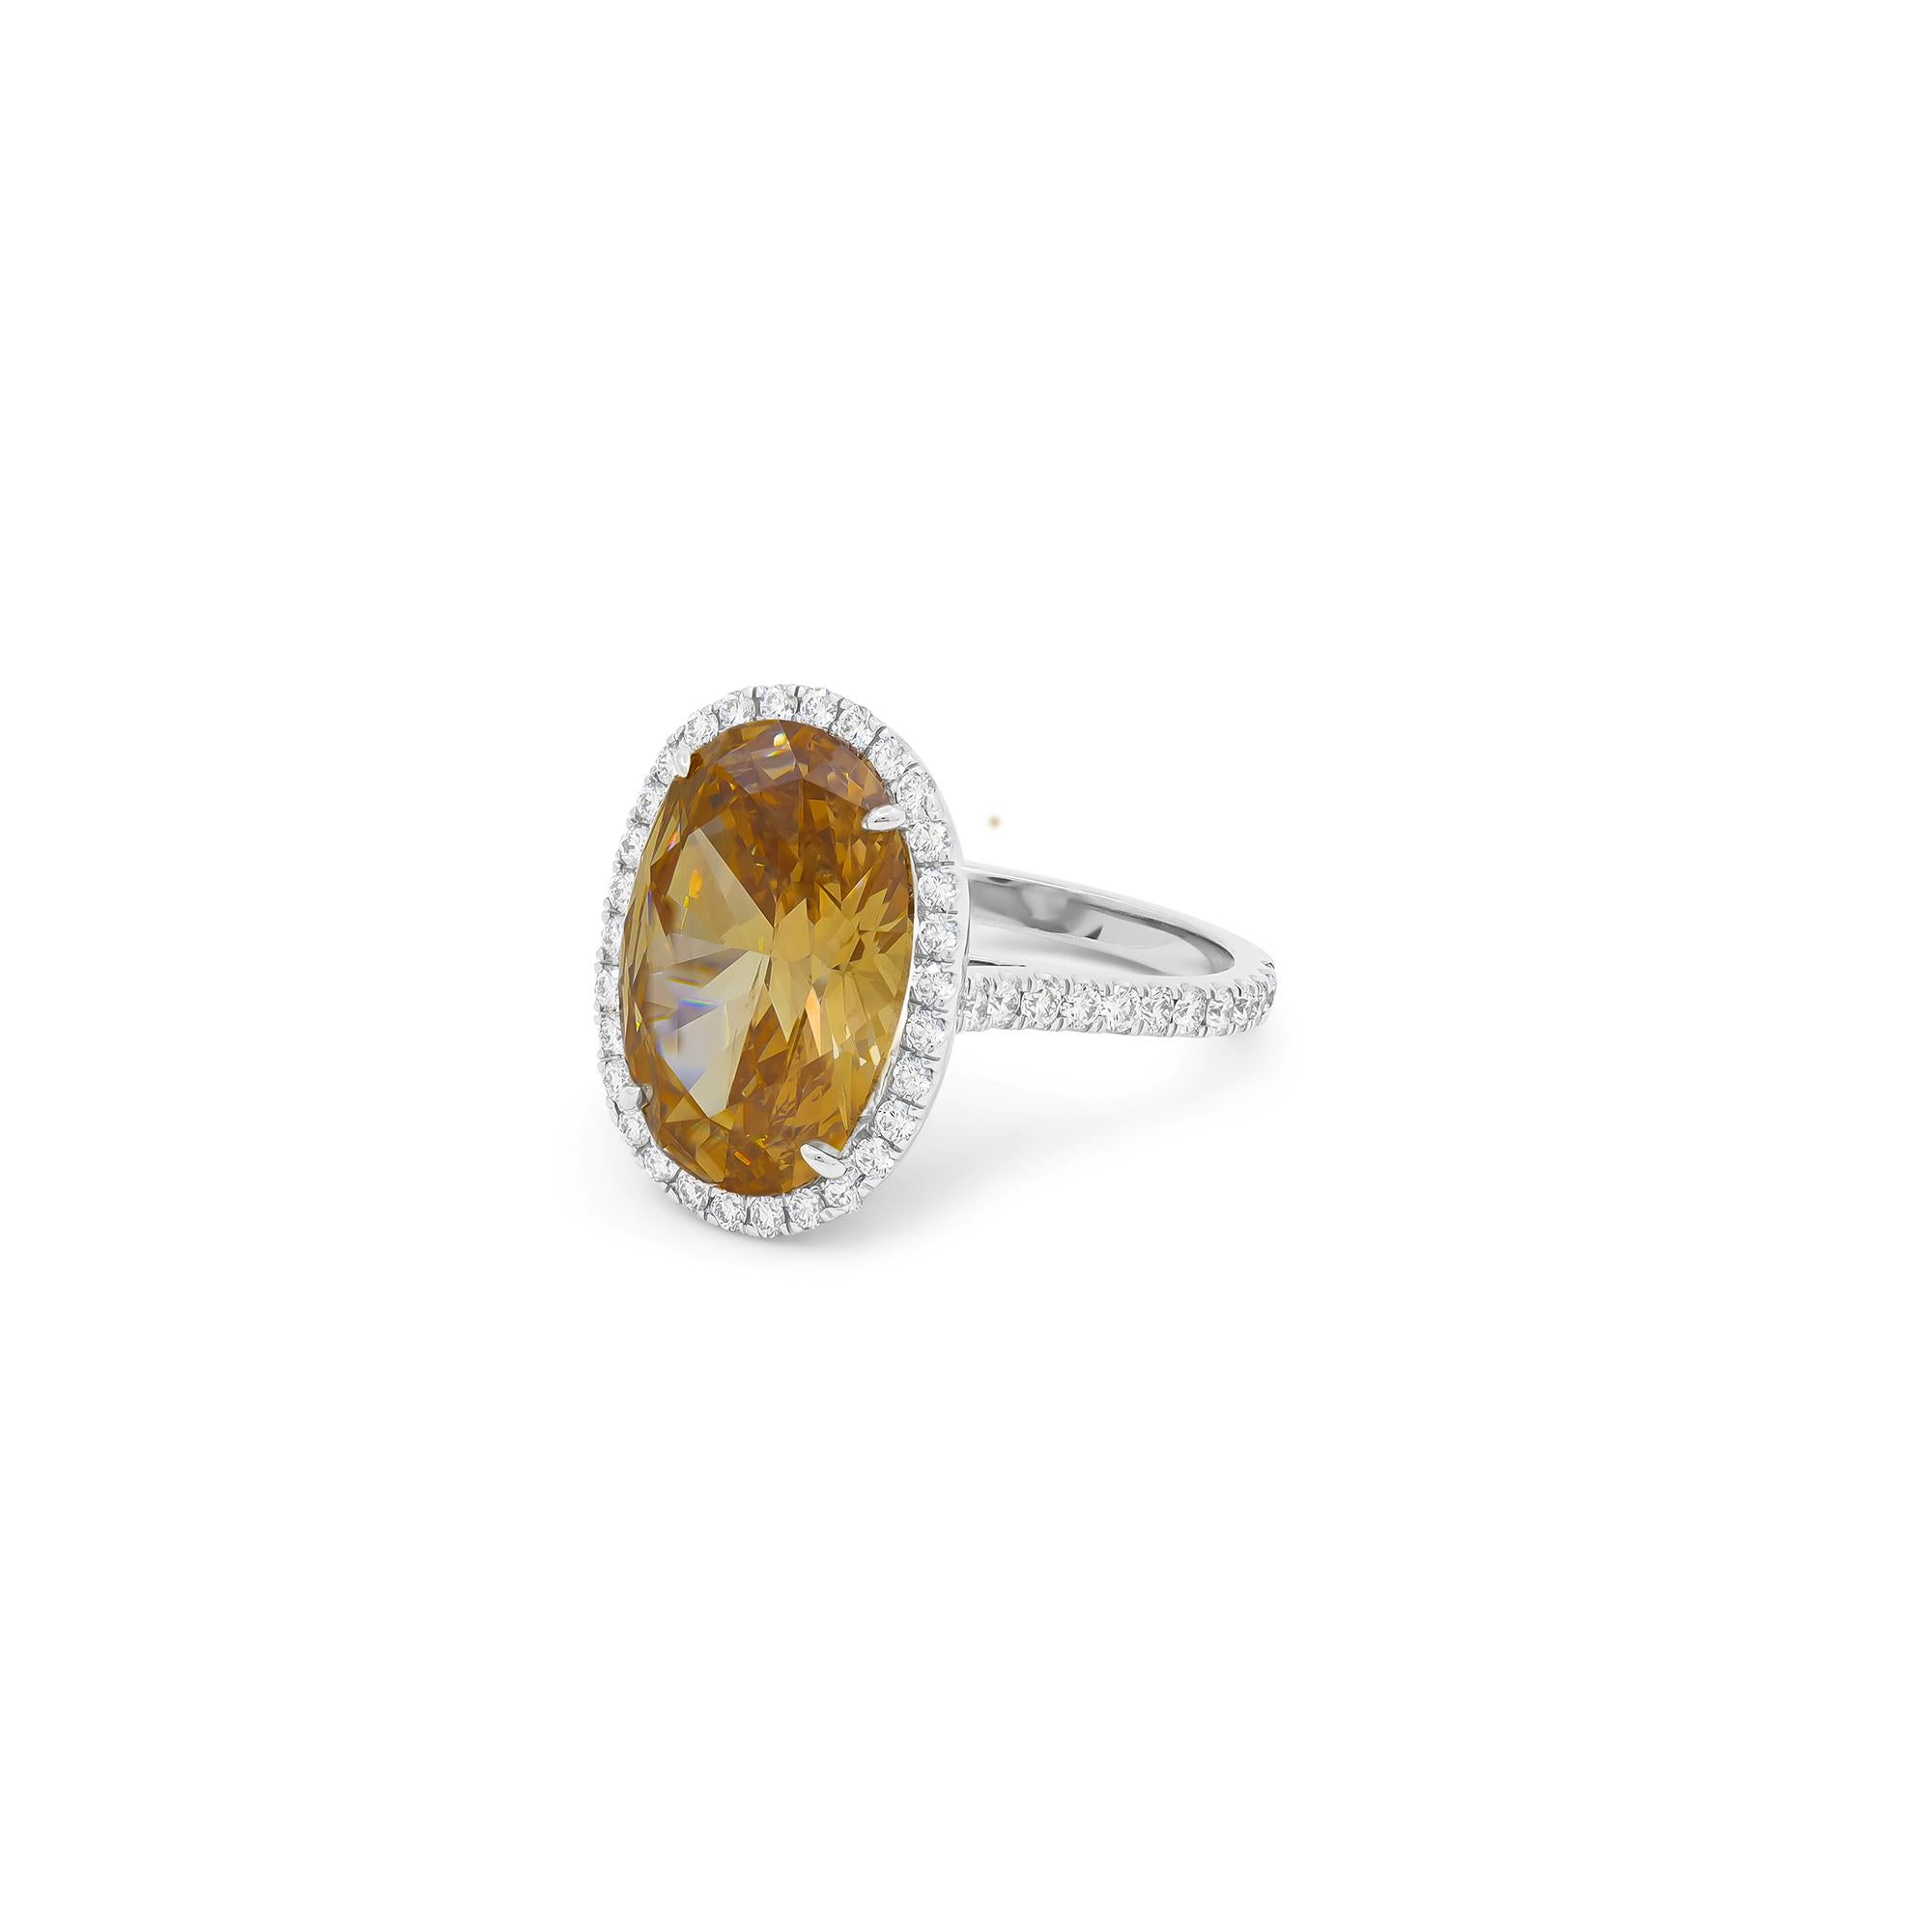 Diana M. Platinum Ring Featuring a center 7.91ct GIA certified Fancy Conac Brown In New Condition For Sale In New York, NY